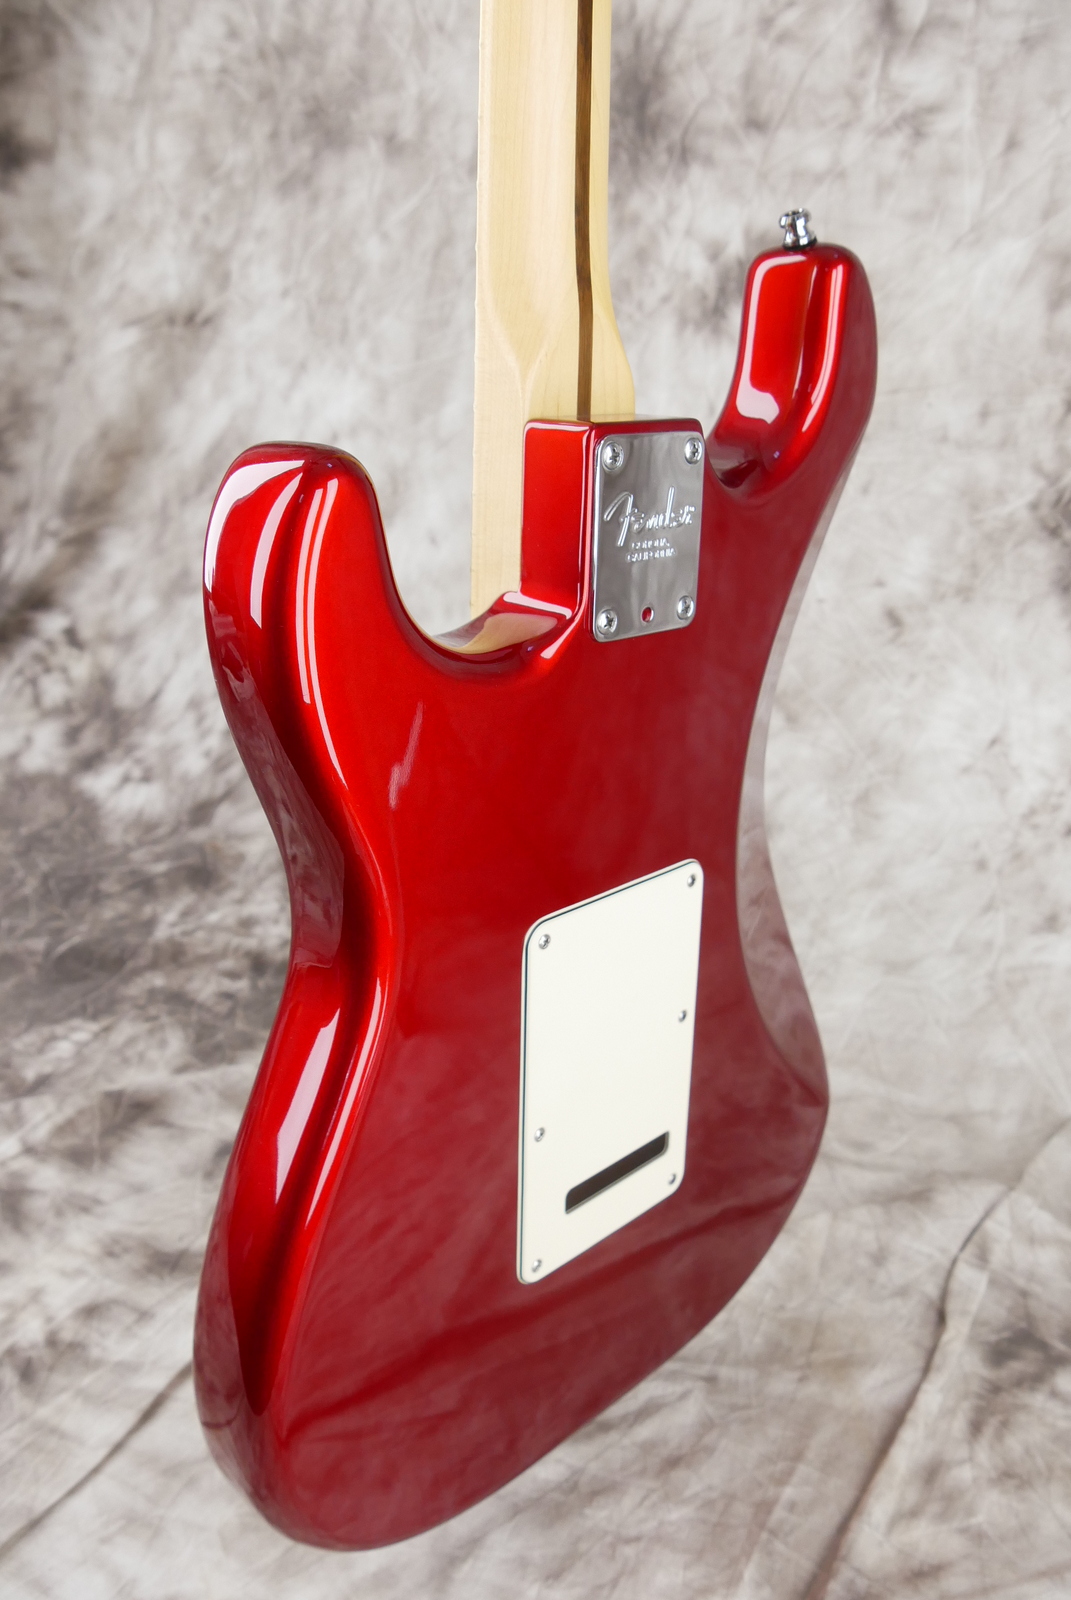 img/vintage/5279/Fender_Stratocaster_USA_built_from_parts_candy_apple_red_2015-007.JPG